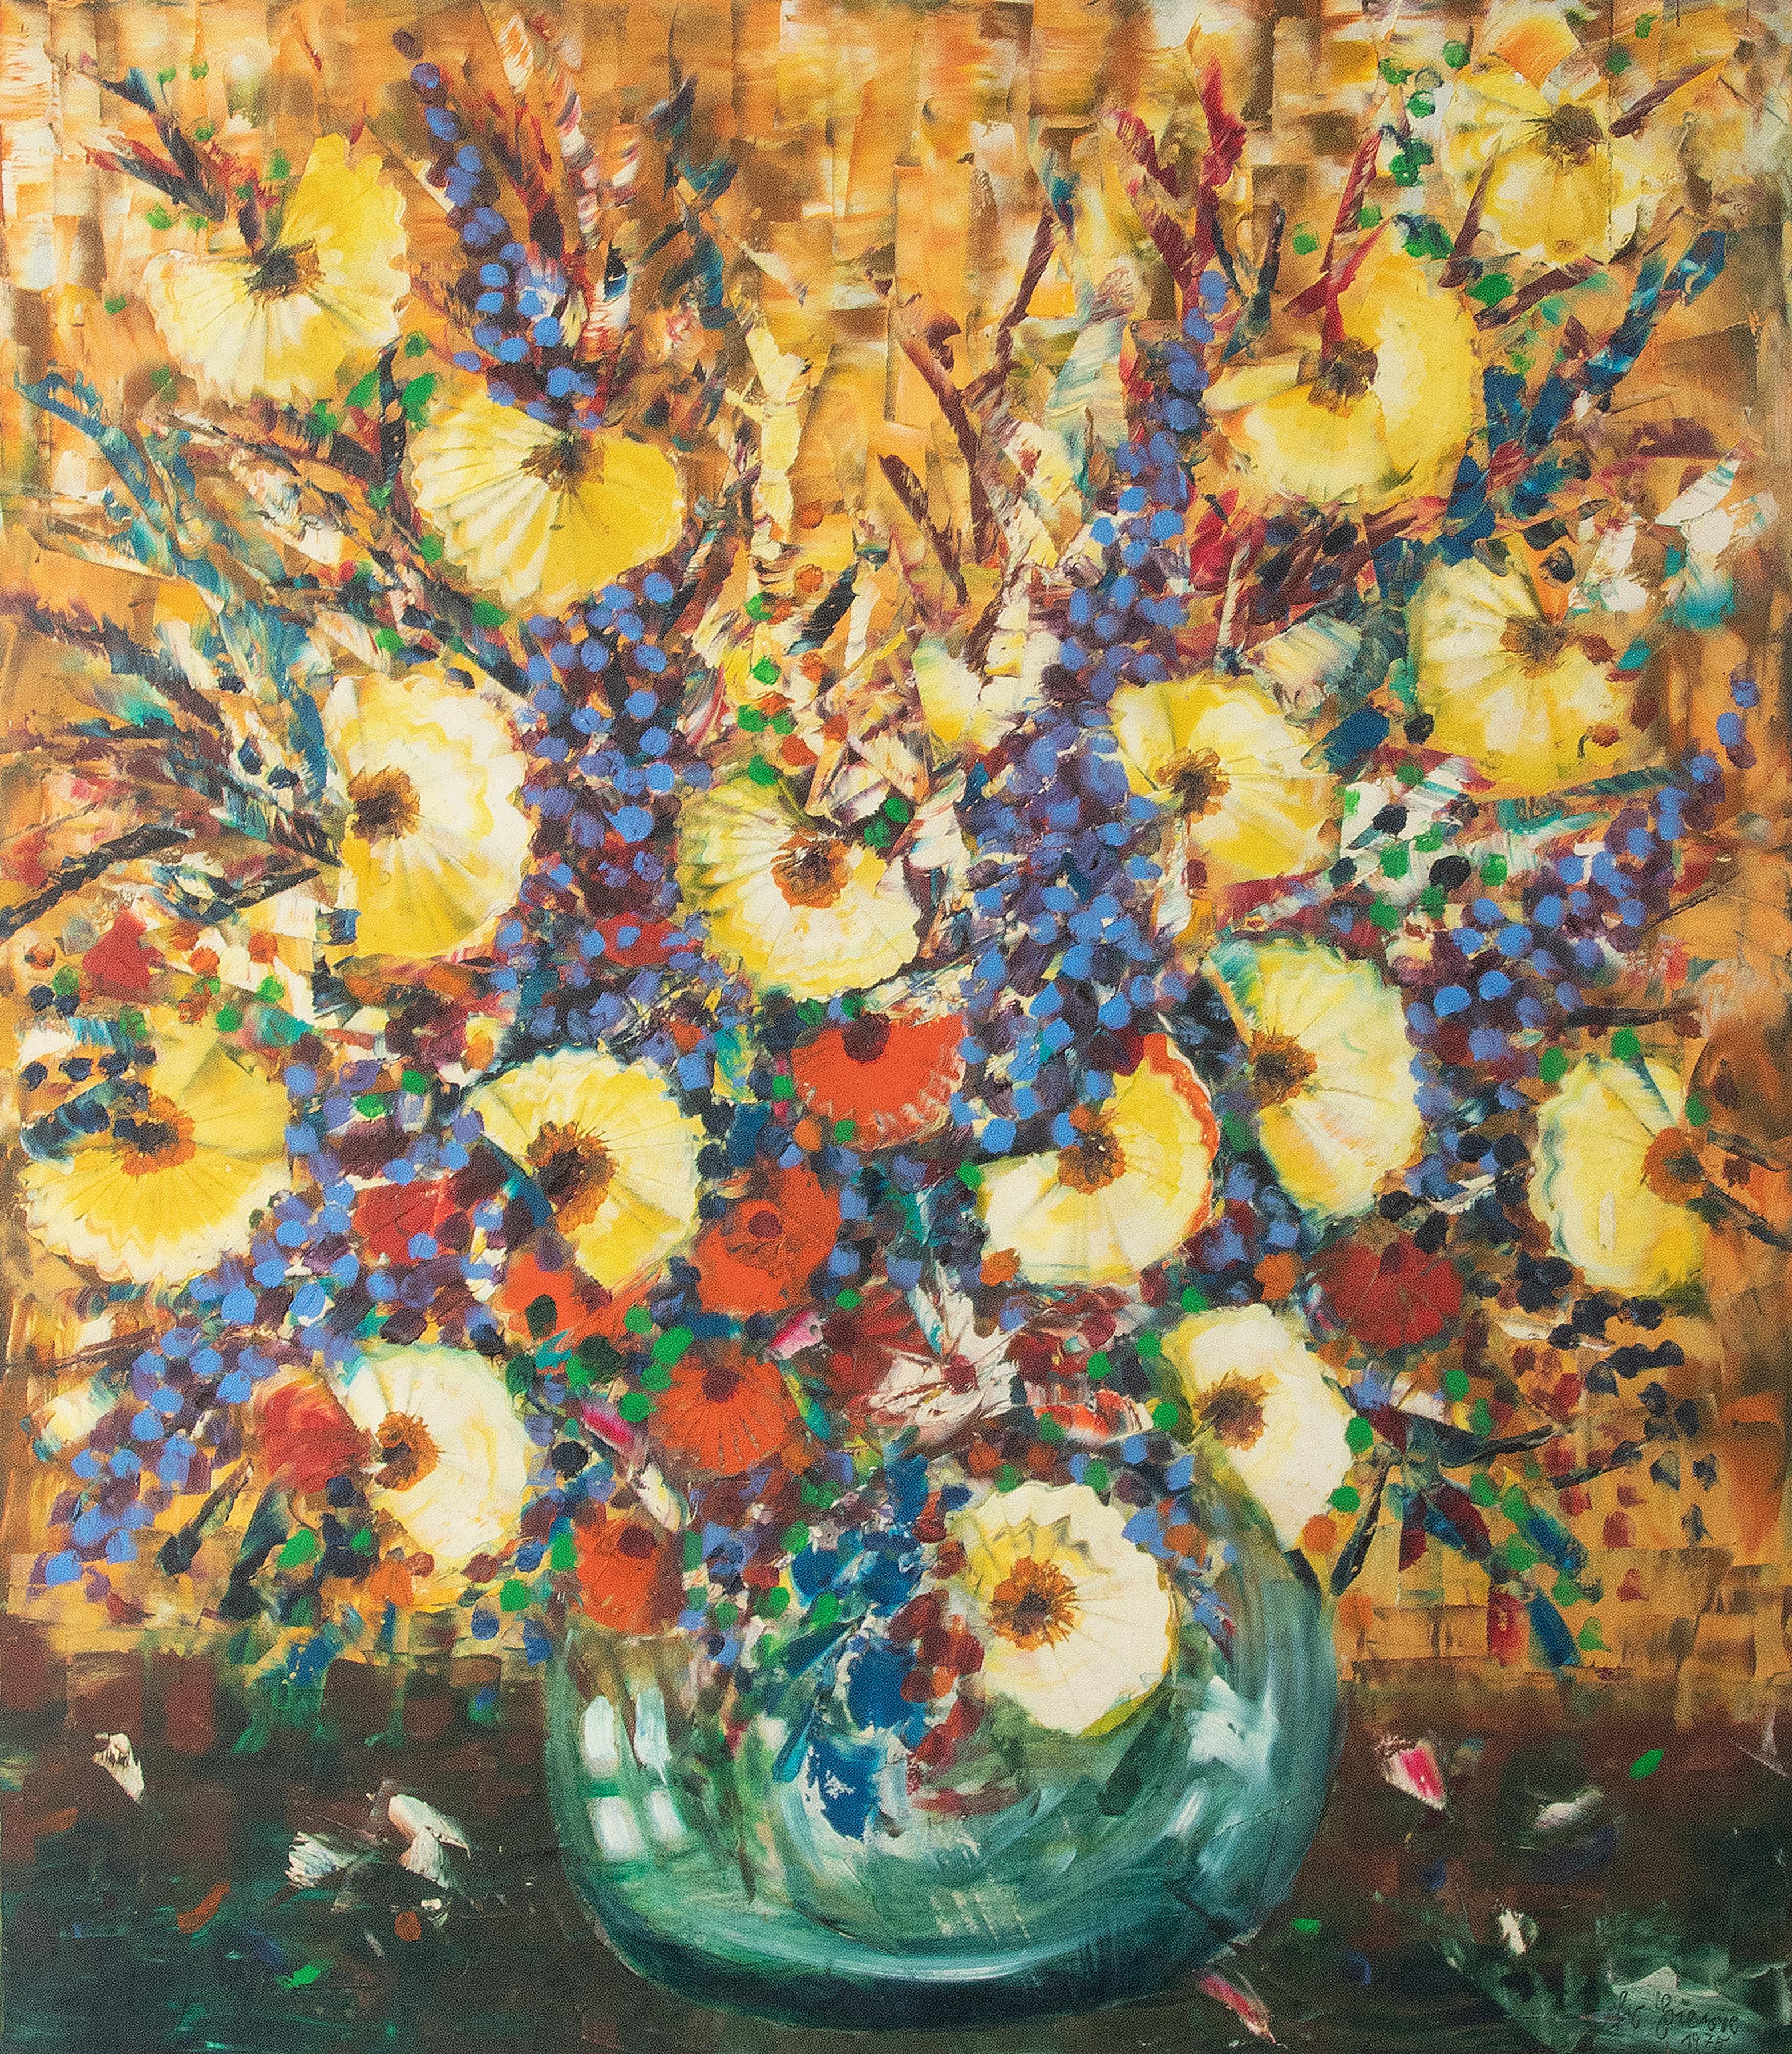 Beautiful and colorful mid century modern painting of a flower still life. The painting dates from circa 1960 and is framed in a simple black wooden frame. The painting is signed lower right J.C. Pierre, no further information is known about this